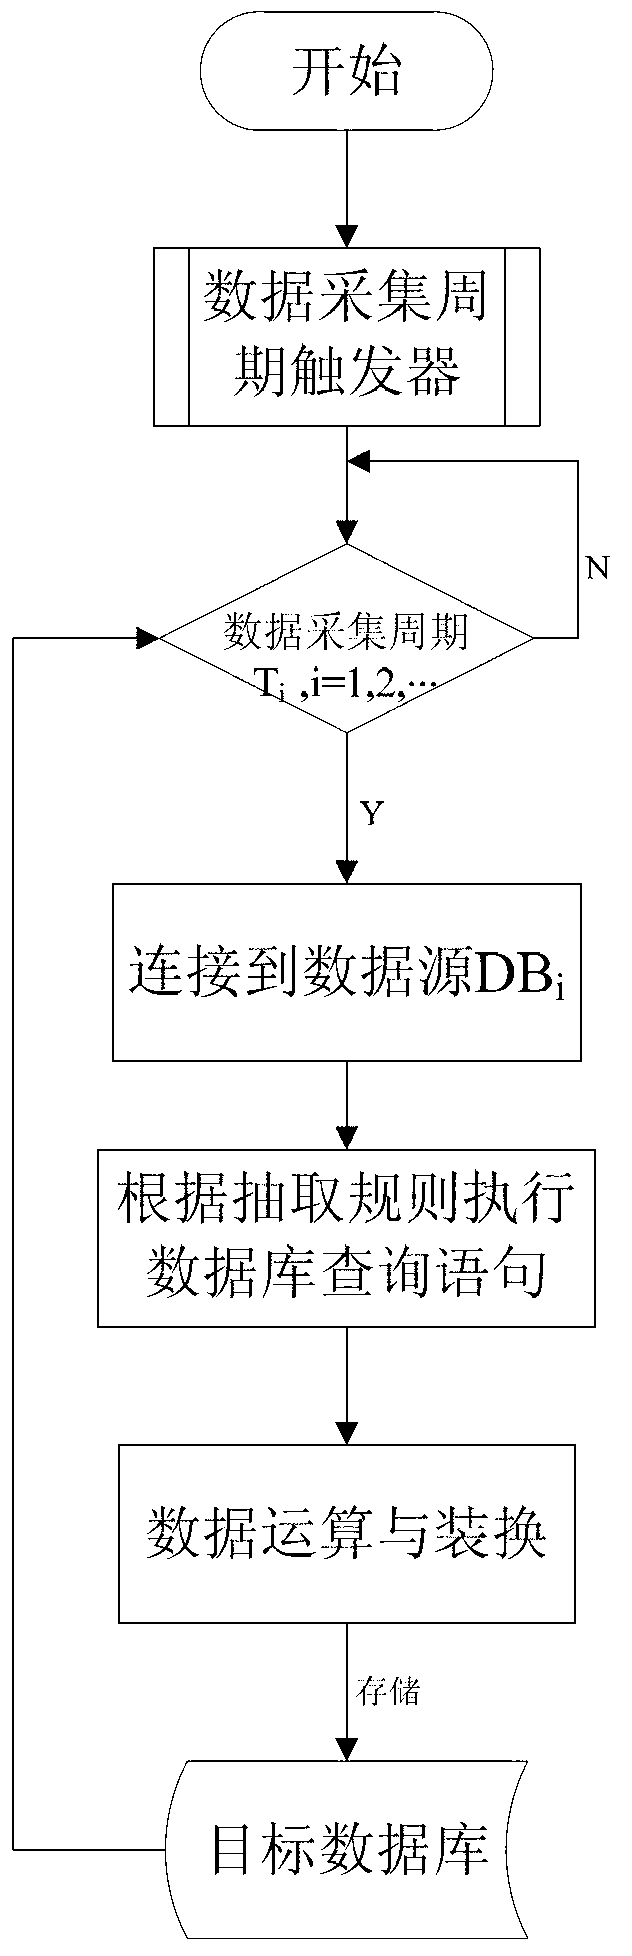 Monitoring and managing system and monitoring and managing method for wind power storing station comprehensive information